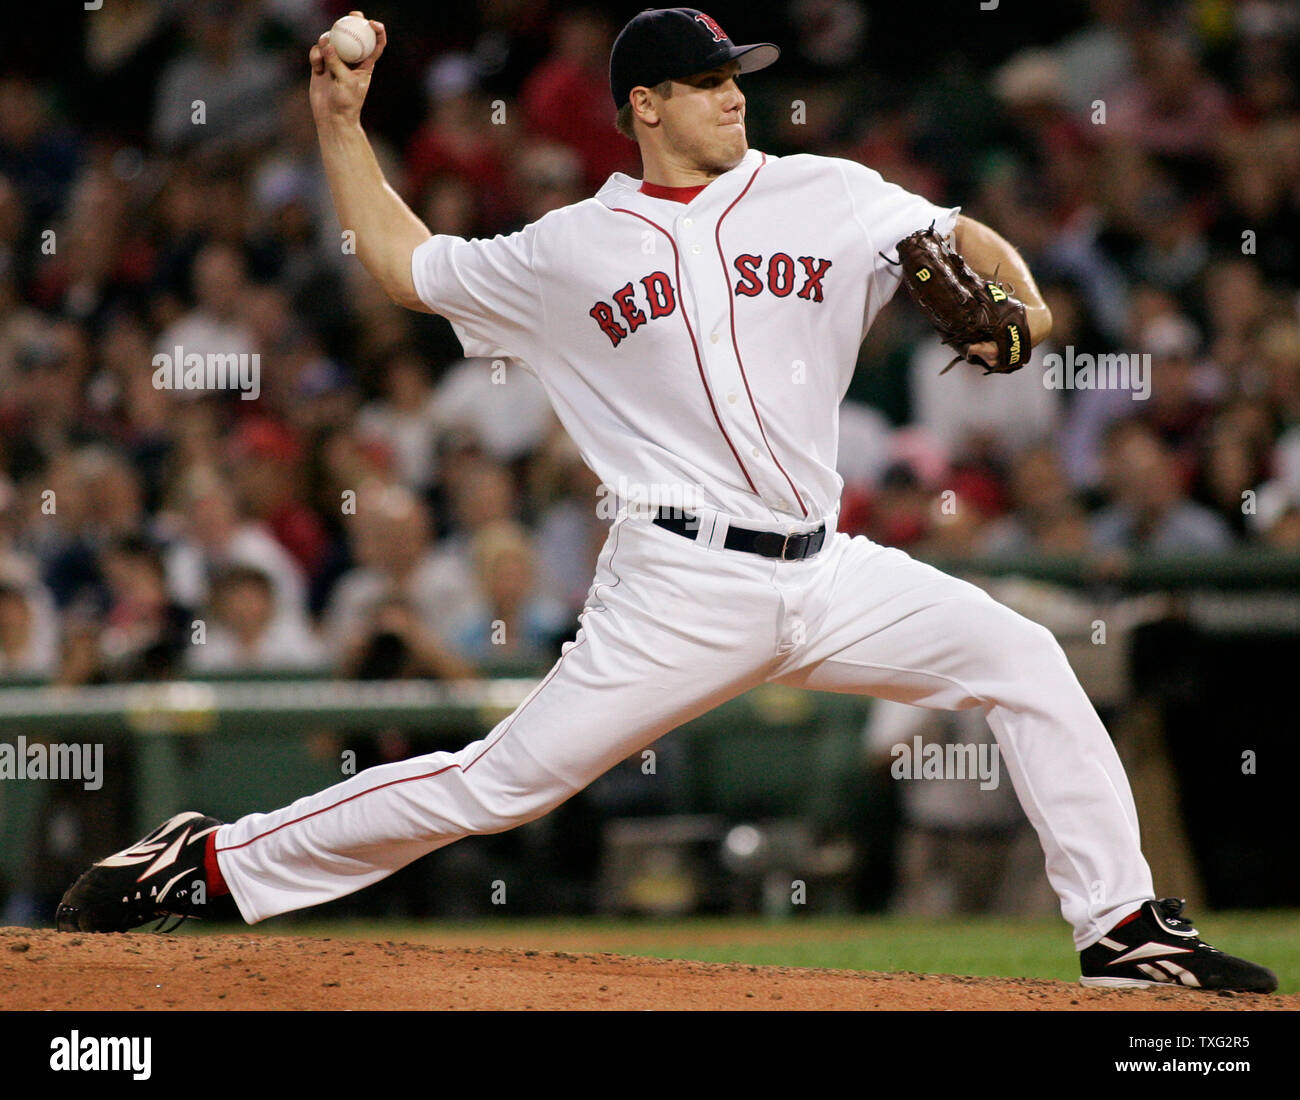 2007 red sox